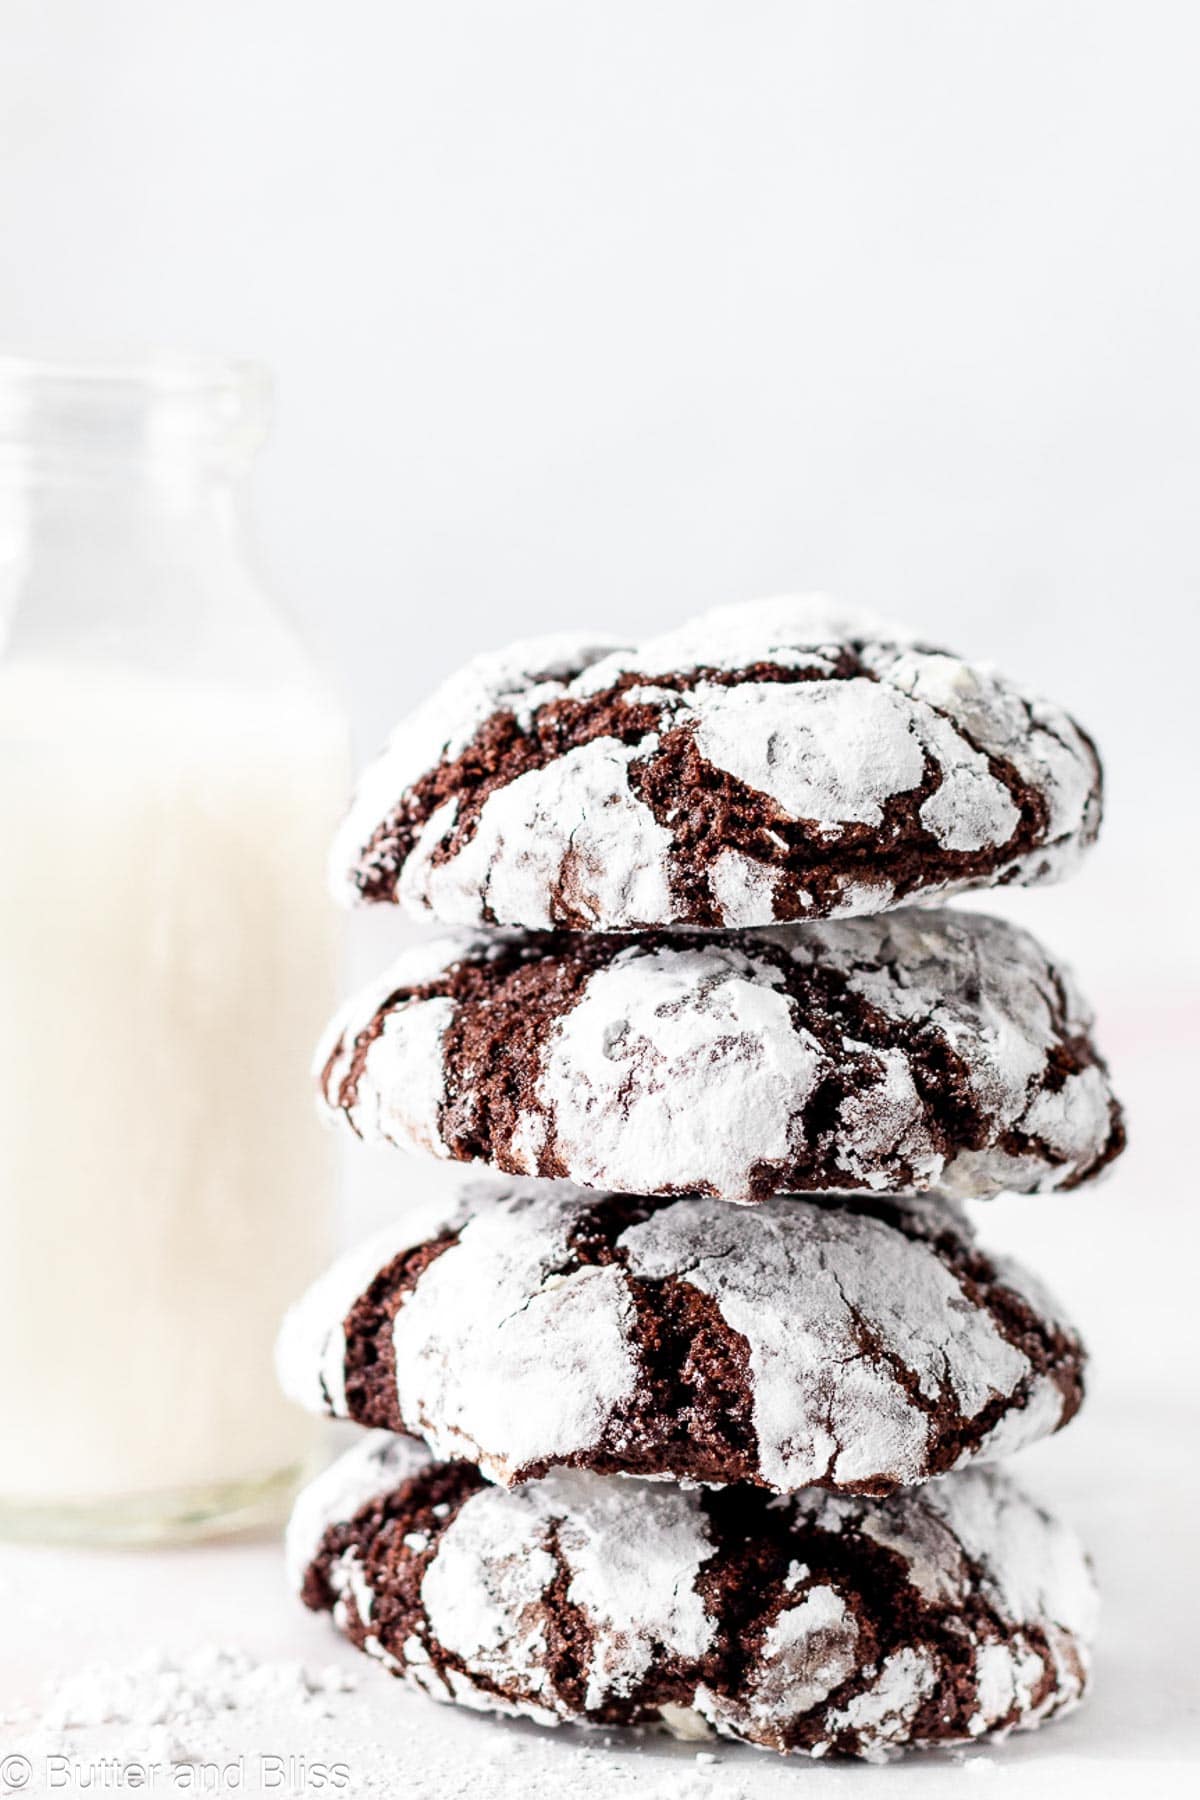 A stack of chocolate and powdered sugar cookies next to a glass of milk.